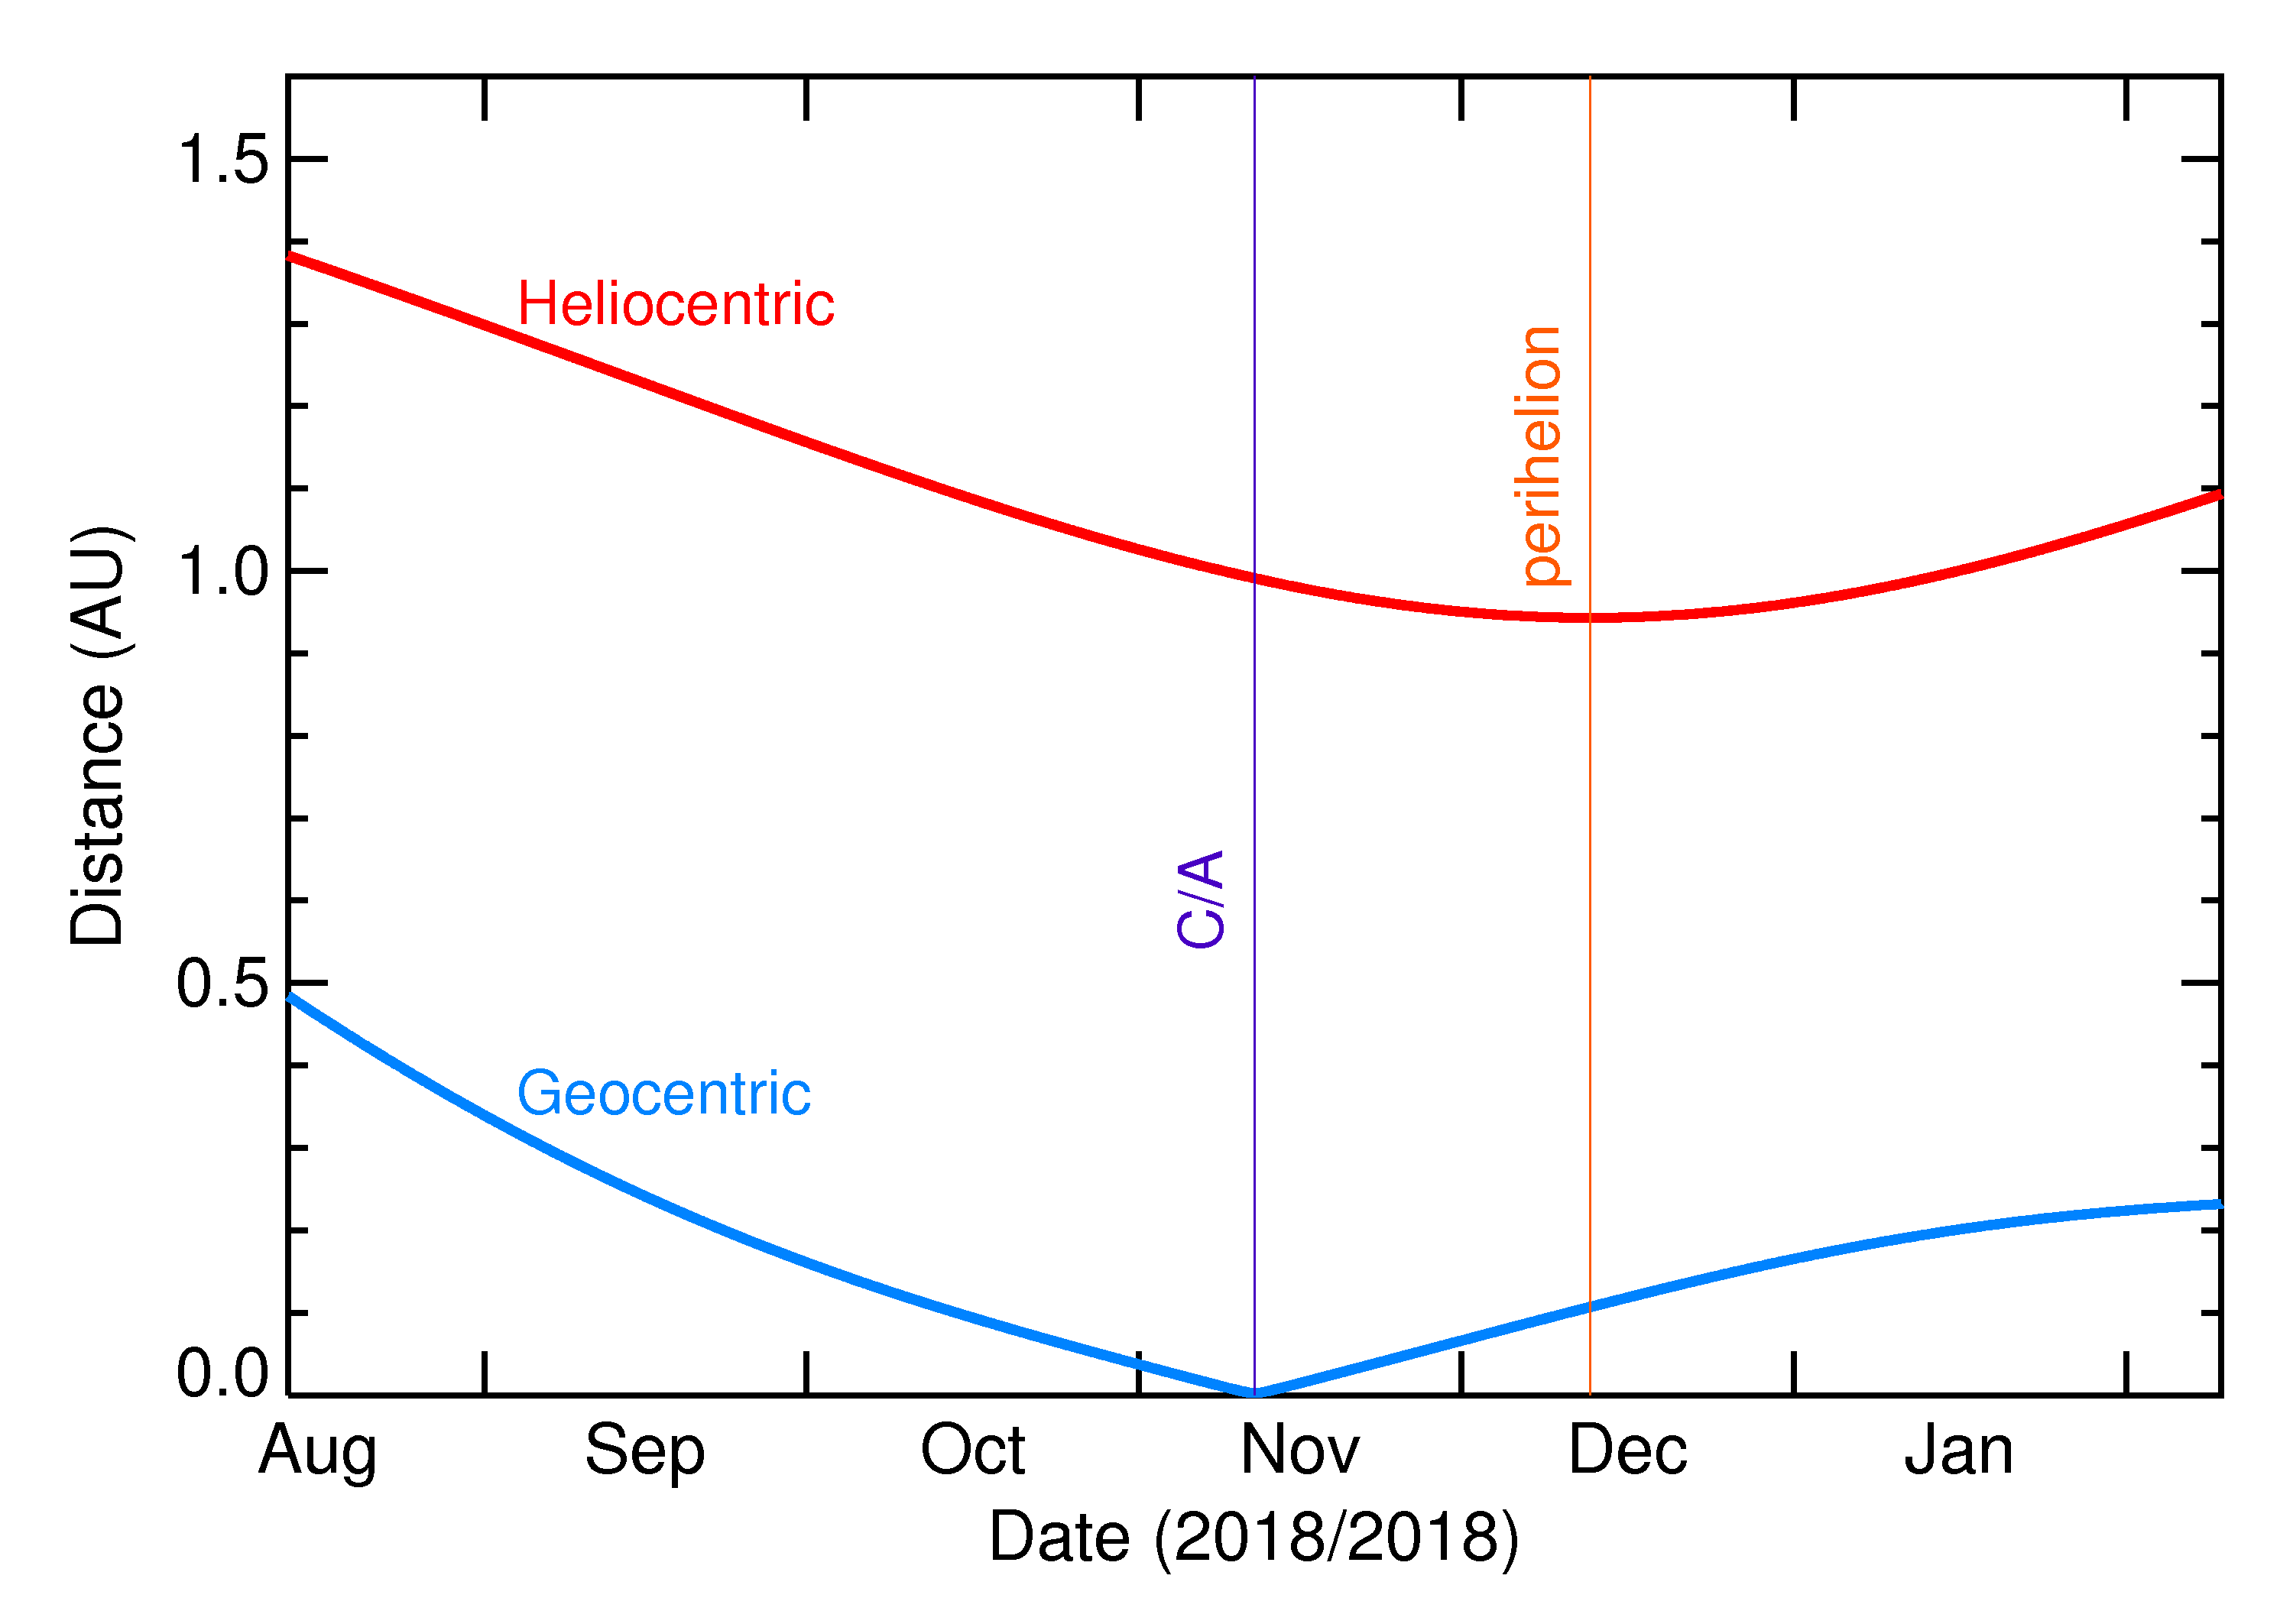 Heliocentric and Geocentric Distances of 2018 VX1 in the months around closest approach